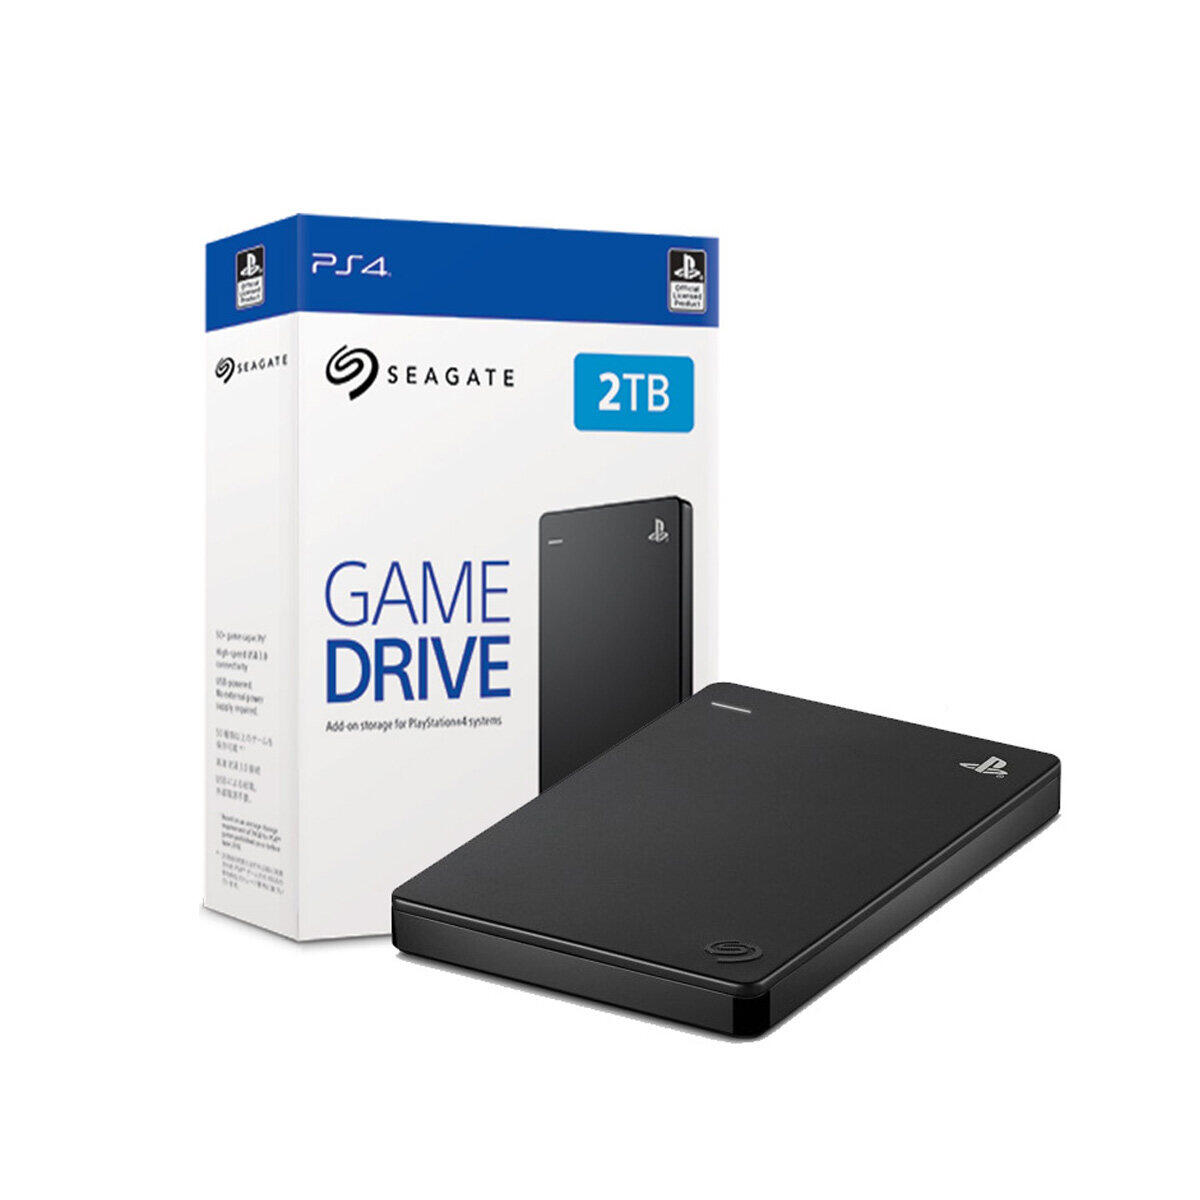 Seagate game drive. Ps4 4tb SSD. Seagate ps4 4tb cheap sell - off 79. Seagate PLAYSTATION (stgd2000300. Seagate game Drive for ps4 4tb.